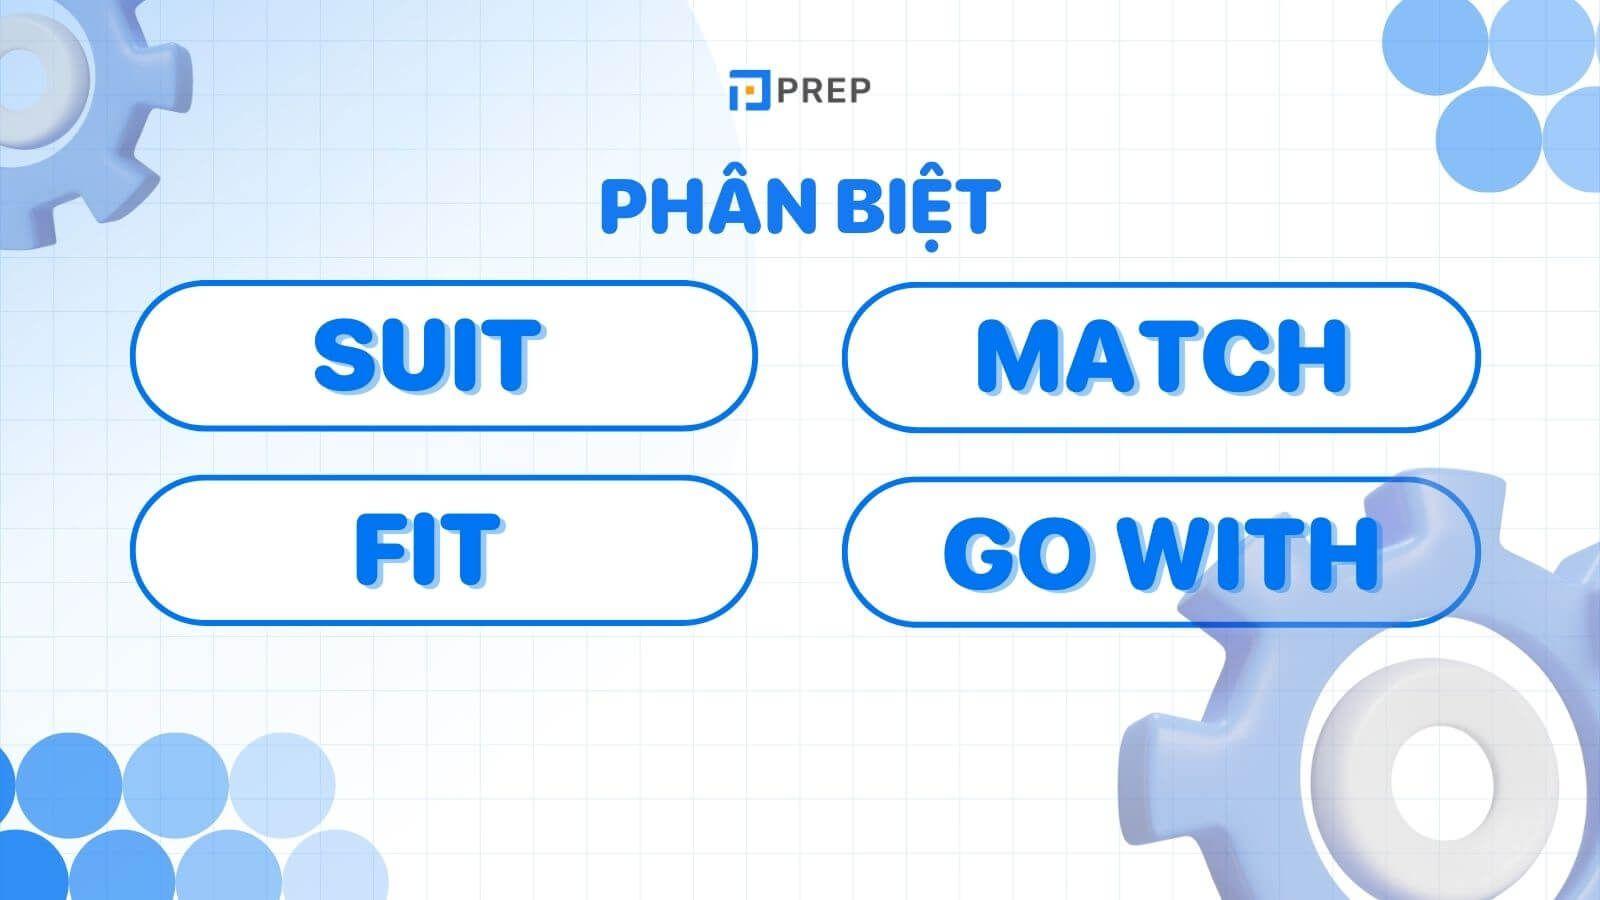 Phân biệt Suit, Match, Fit, Go with